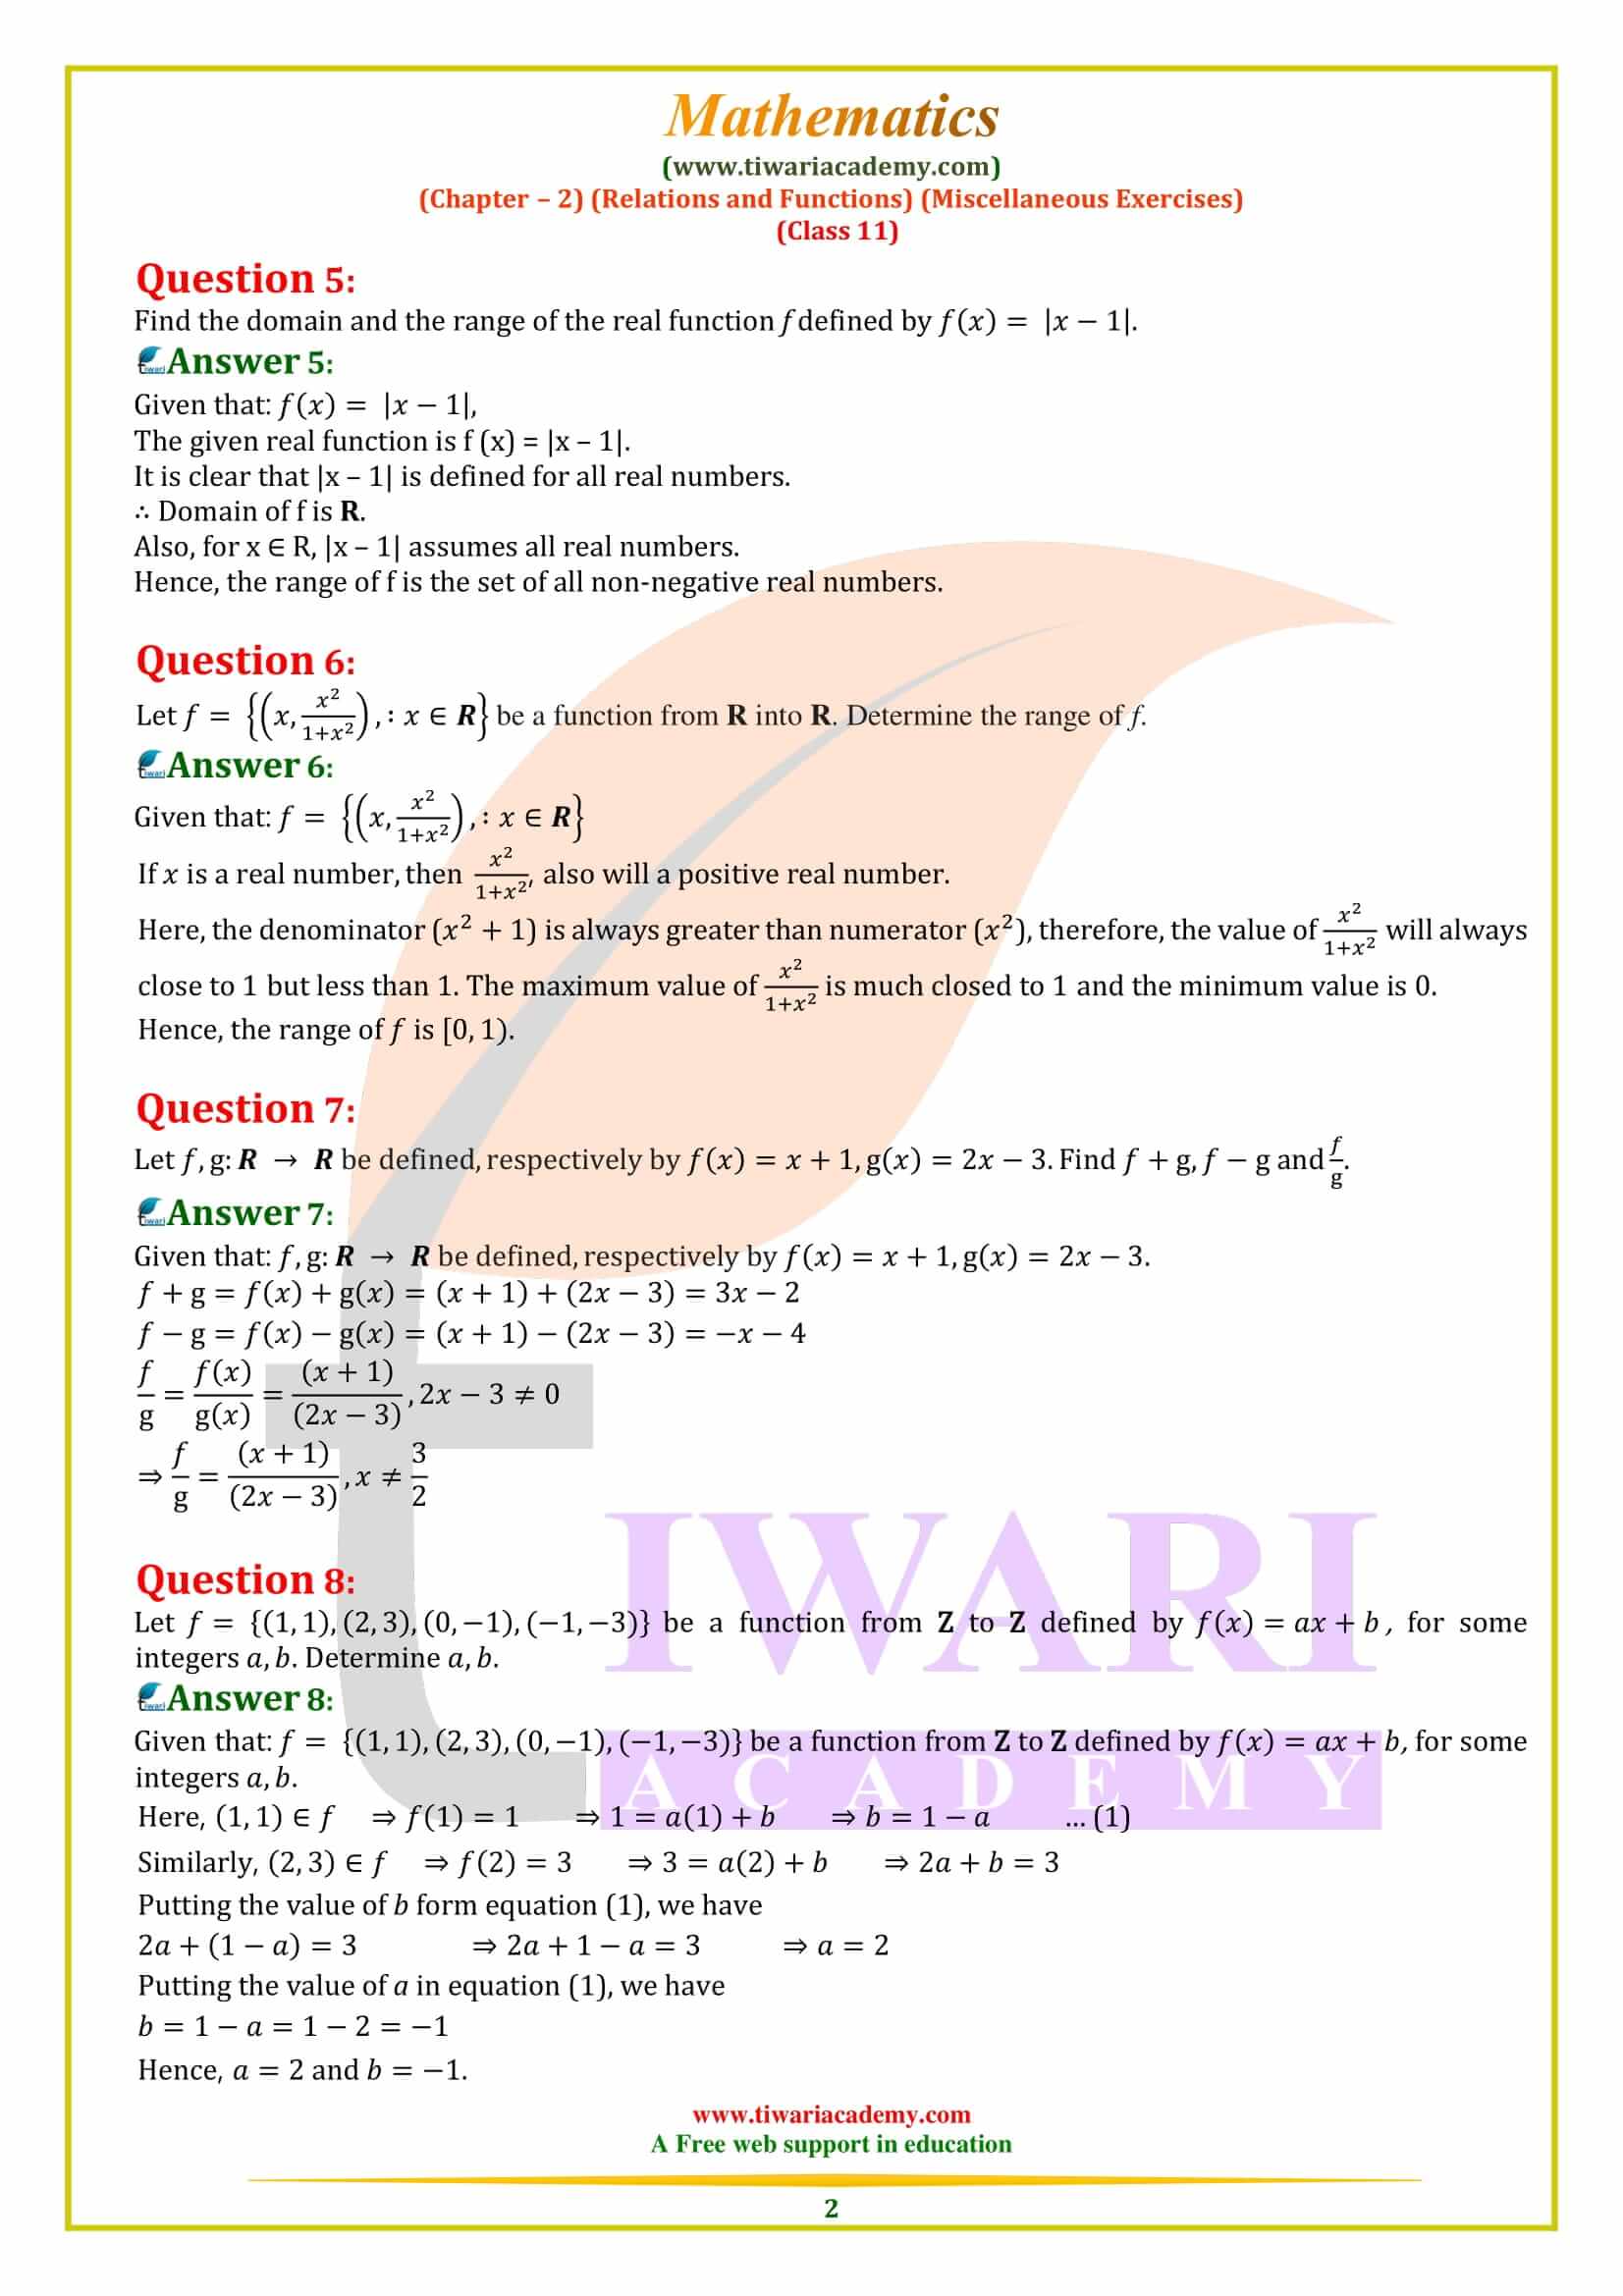 NCERT Solutions for Class 11 Maths Chapter 2 Mis. Exercise